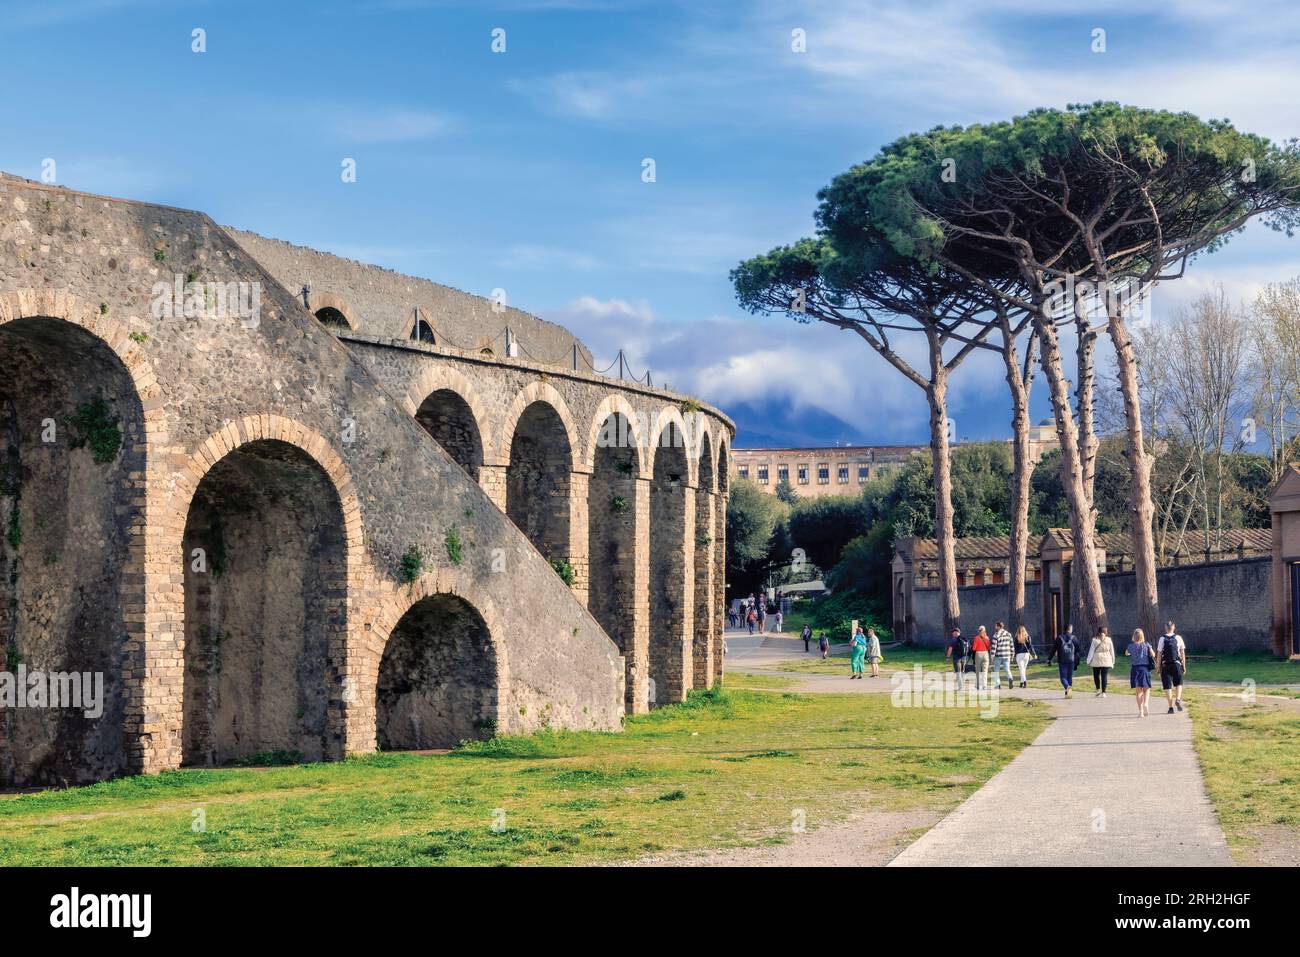 Pompeii Archaeological Site, Campania, Italy.  The amphitheatre, dating from 70 BC.  Pompeii, Herculaneum, and Torre Annunziata are collectively desig Stock Photo